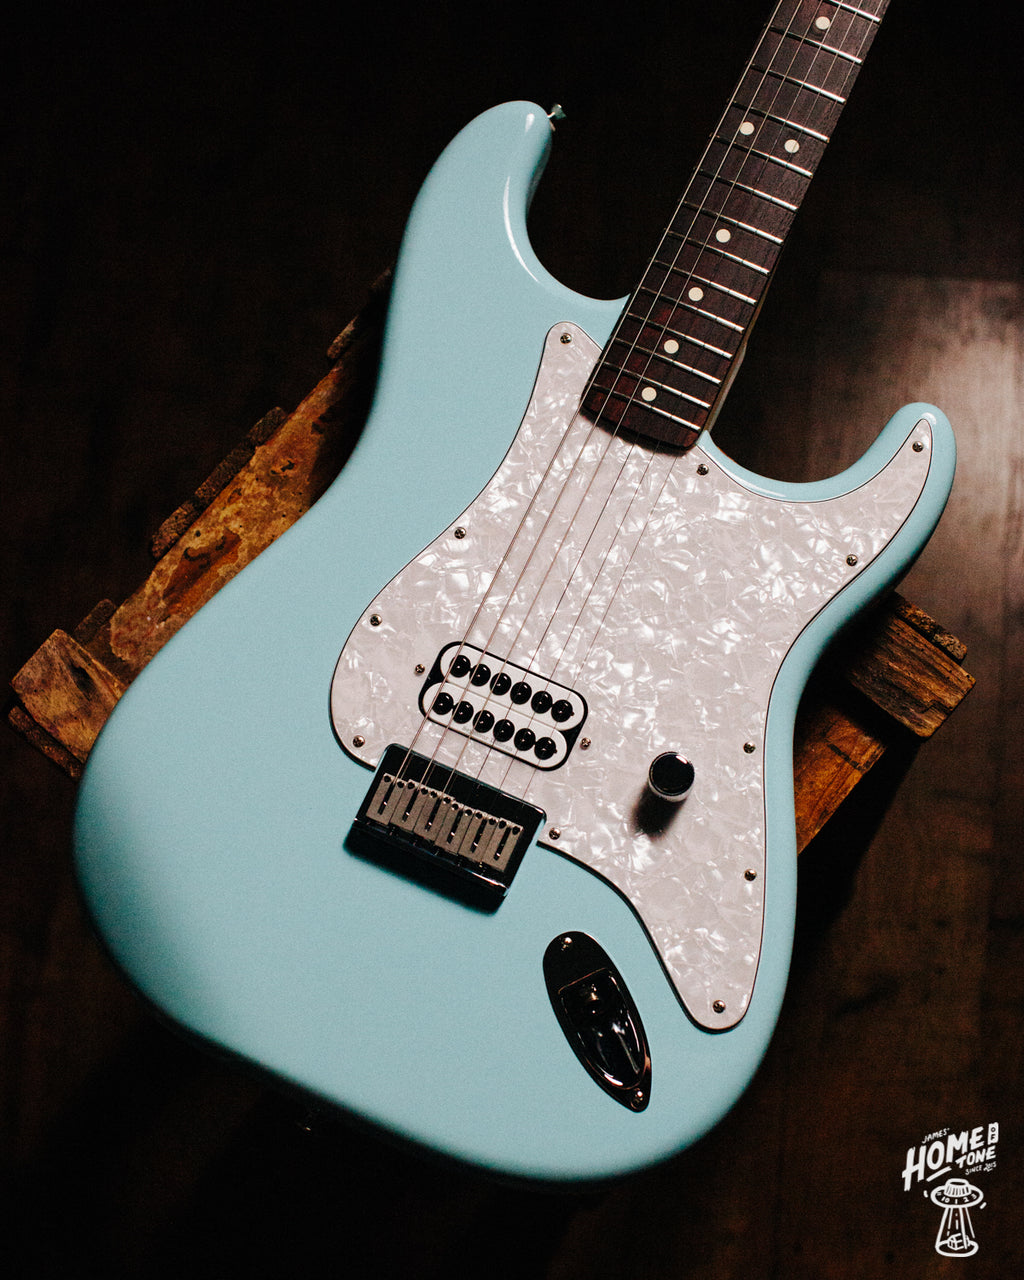 My first, and honest look at the 2023 reissue Tom Delonge Strat